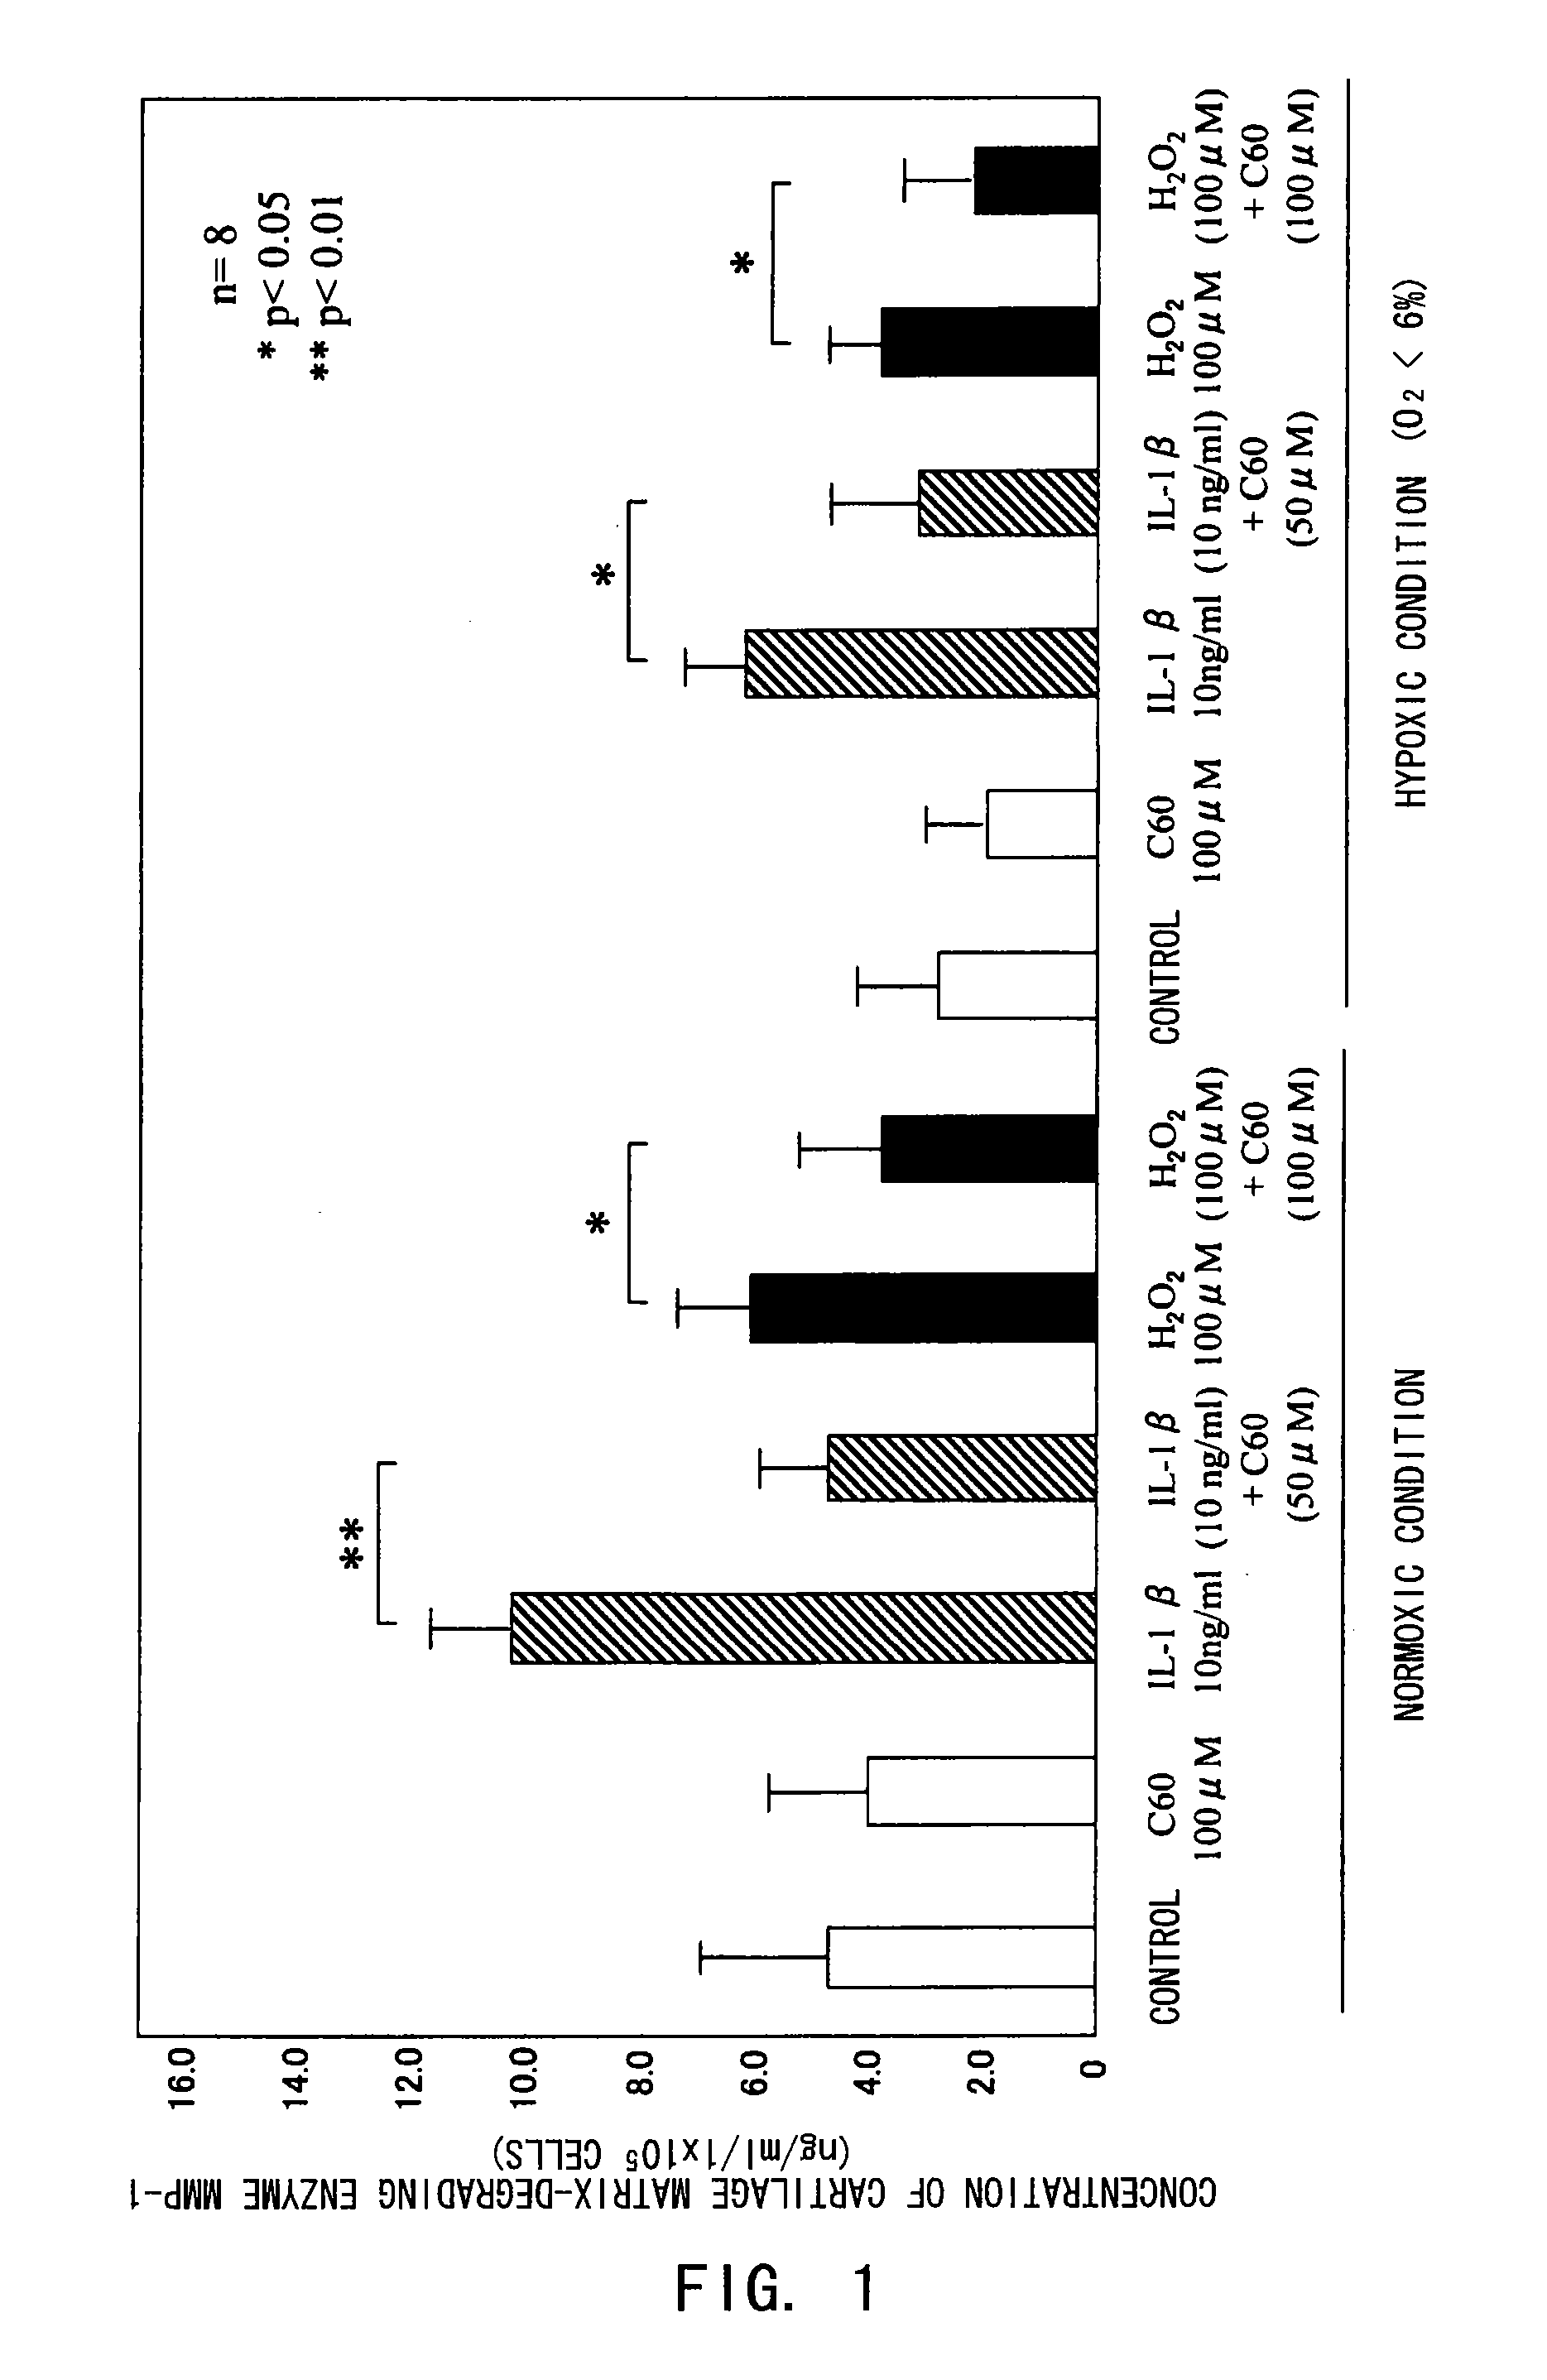 Pharmaceutical compositions for treating/preventing motor organ diseases